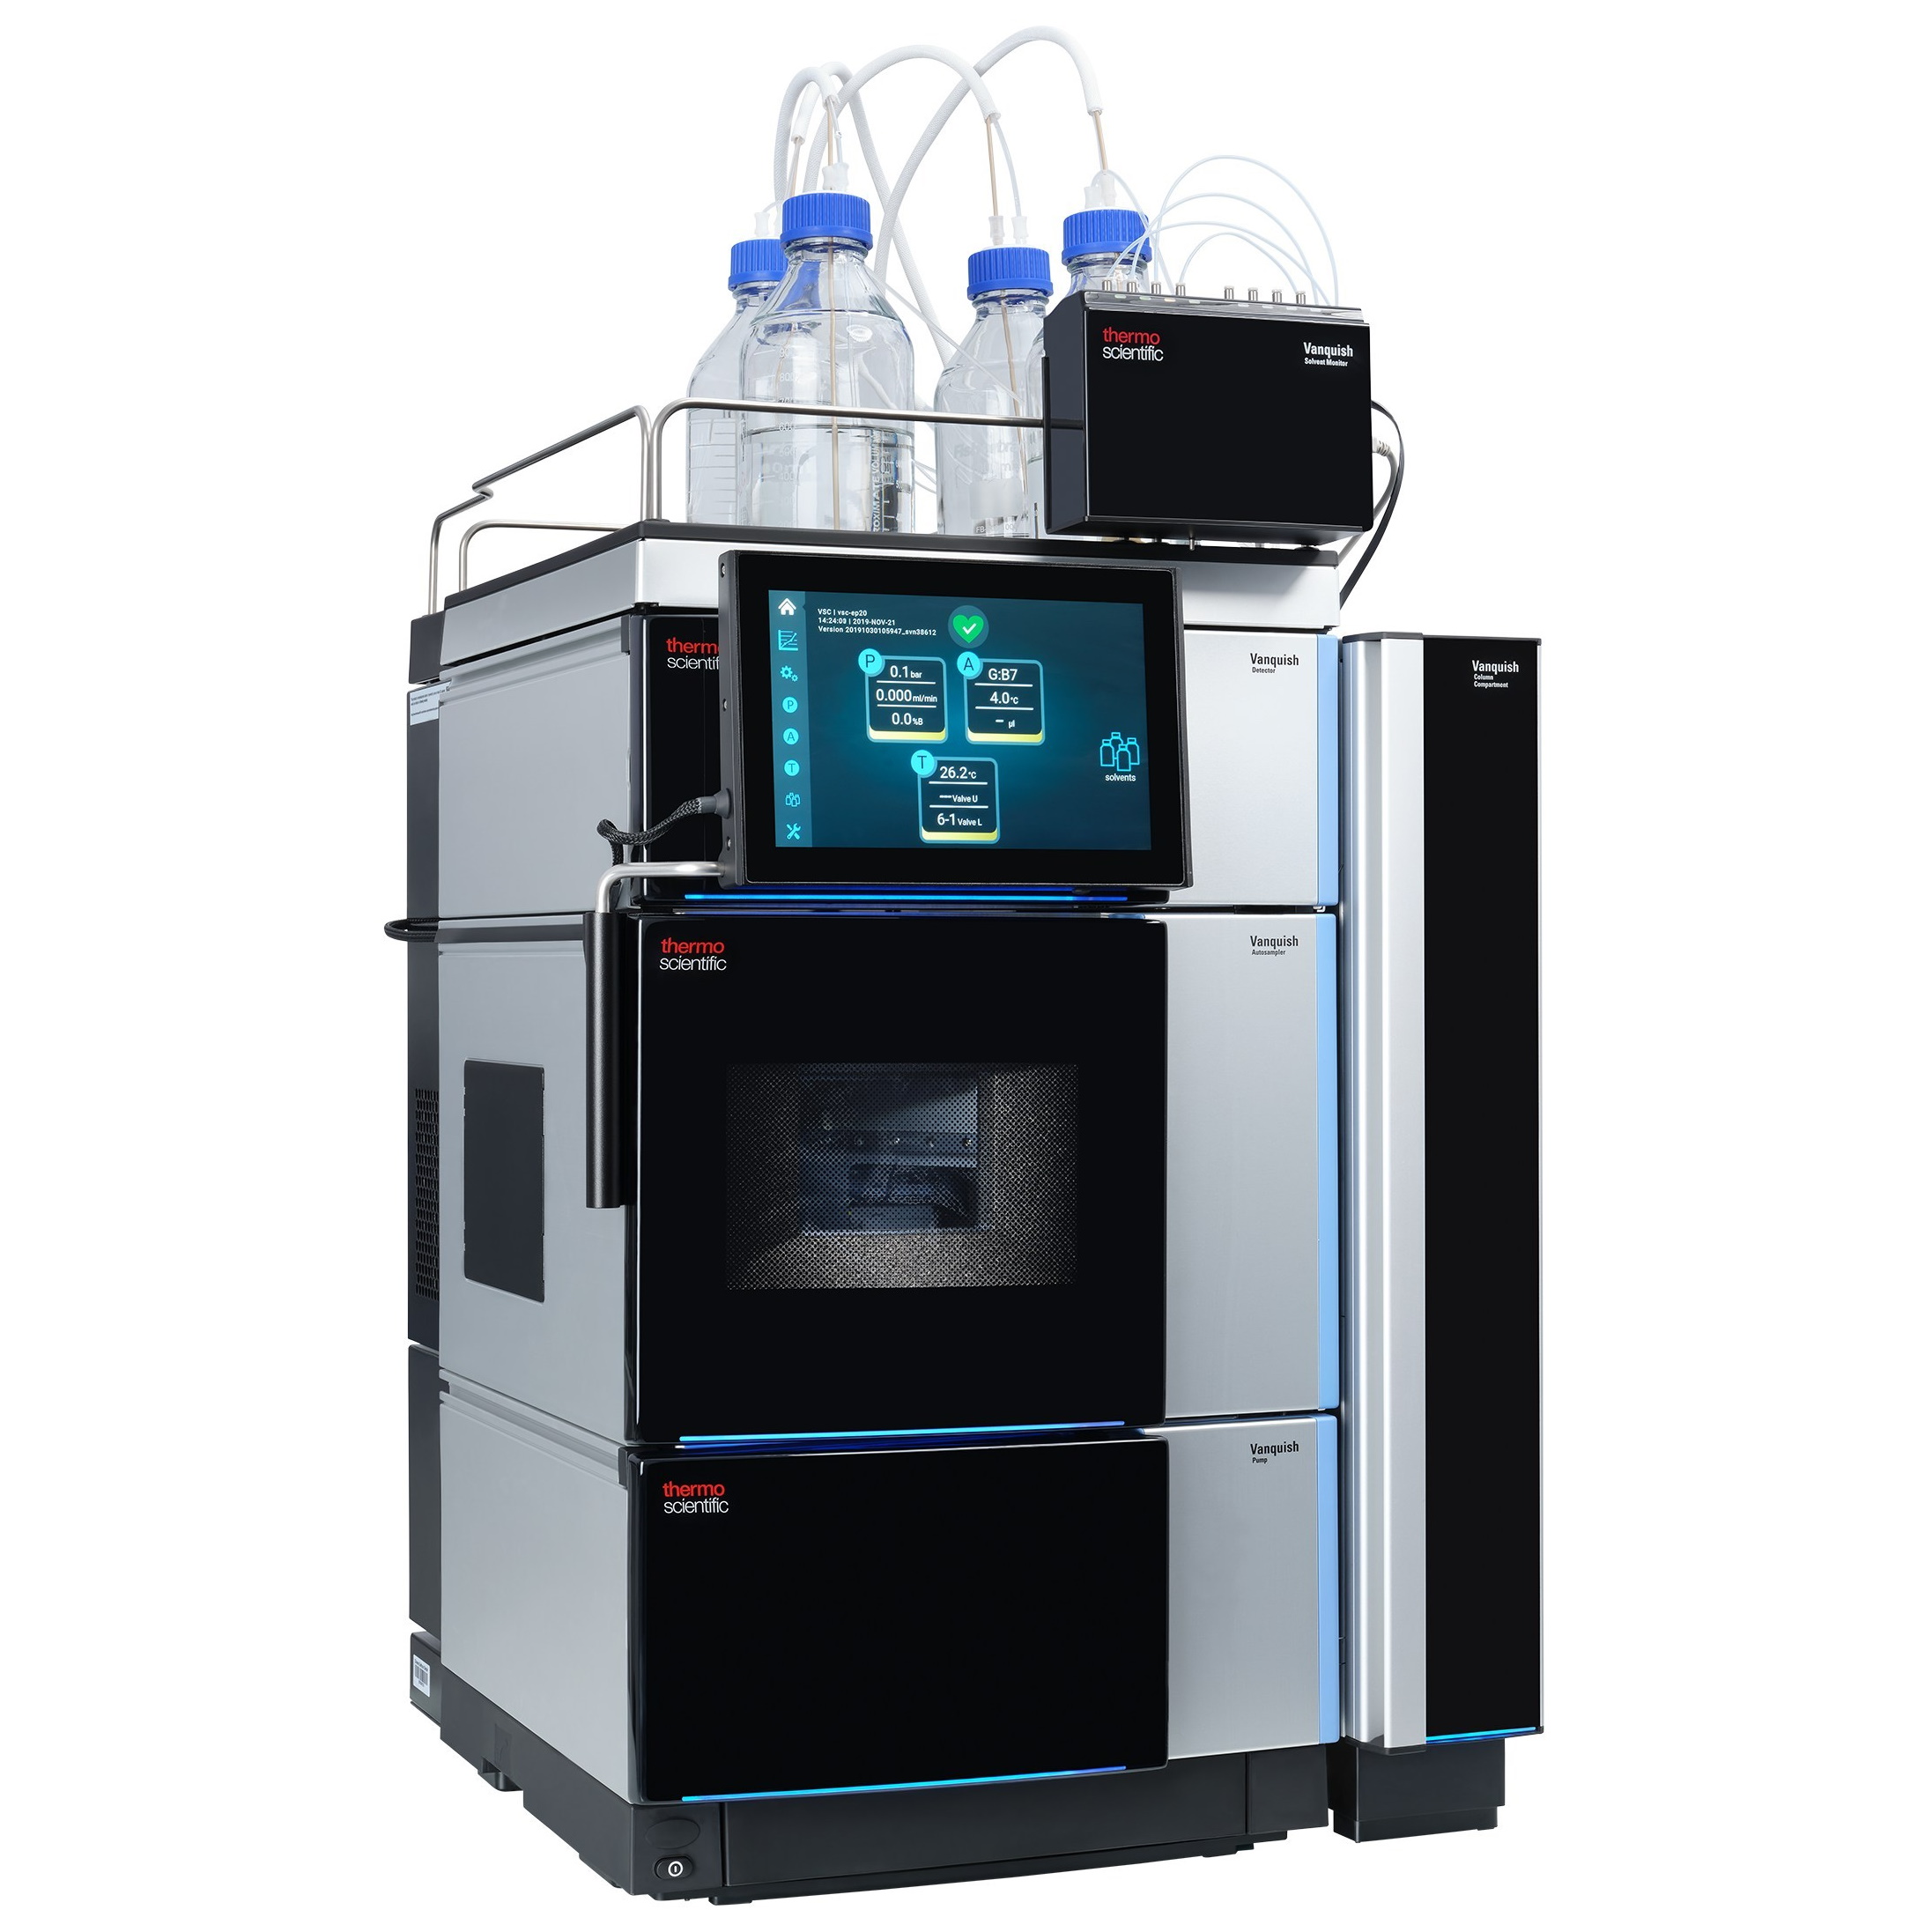 Thermo Fisher launches new HPLC system 2020 Wiley Analytical Science